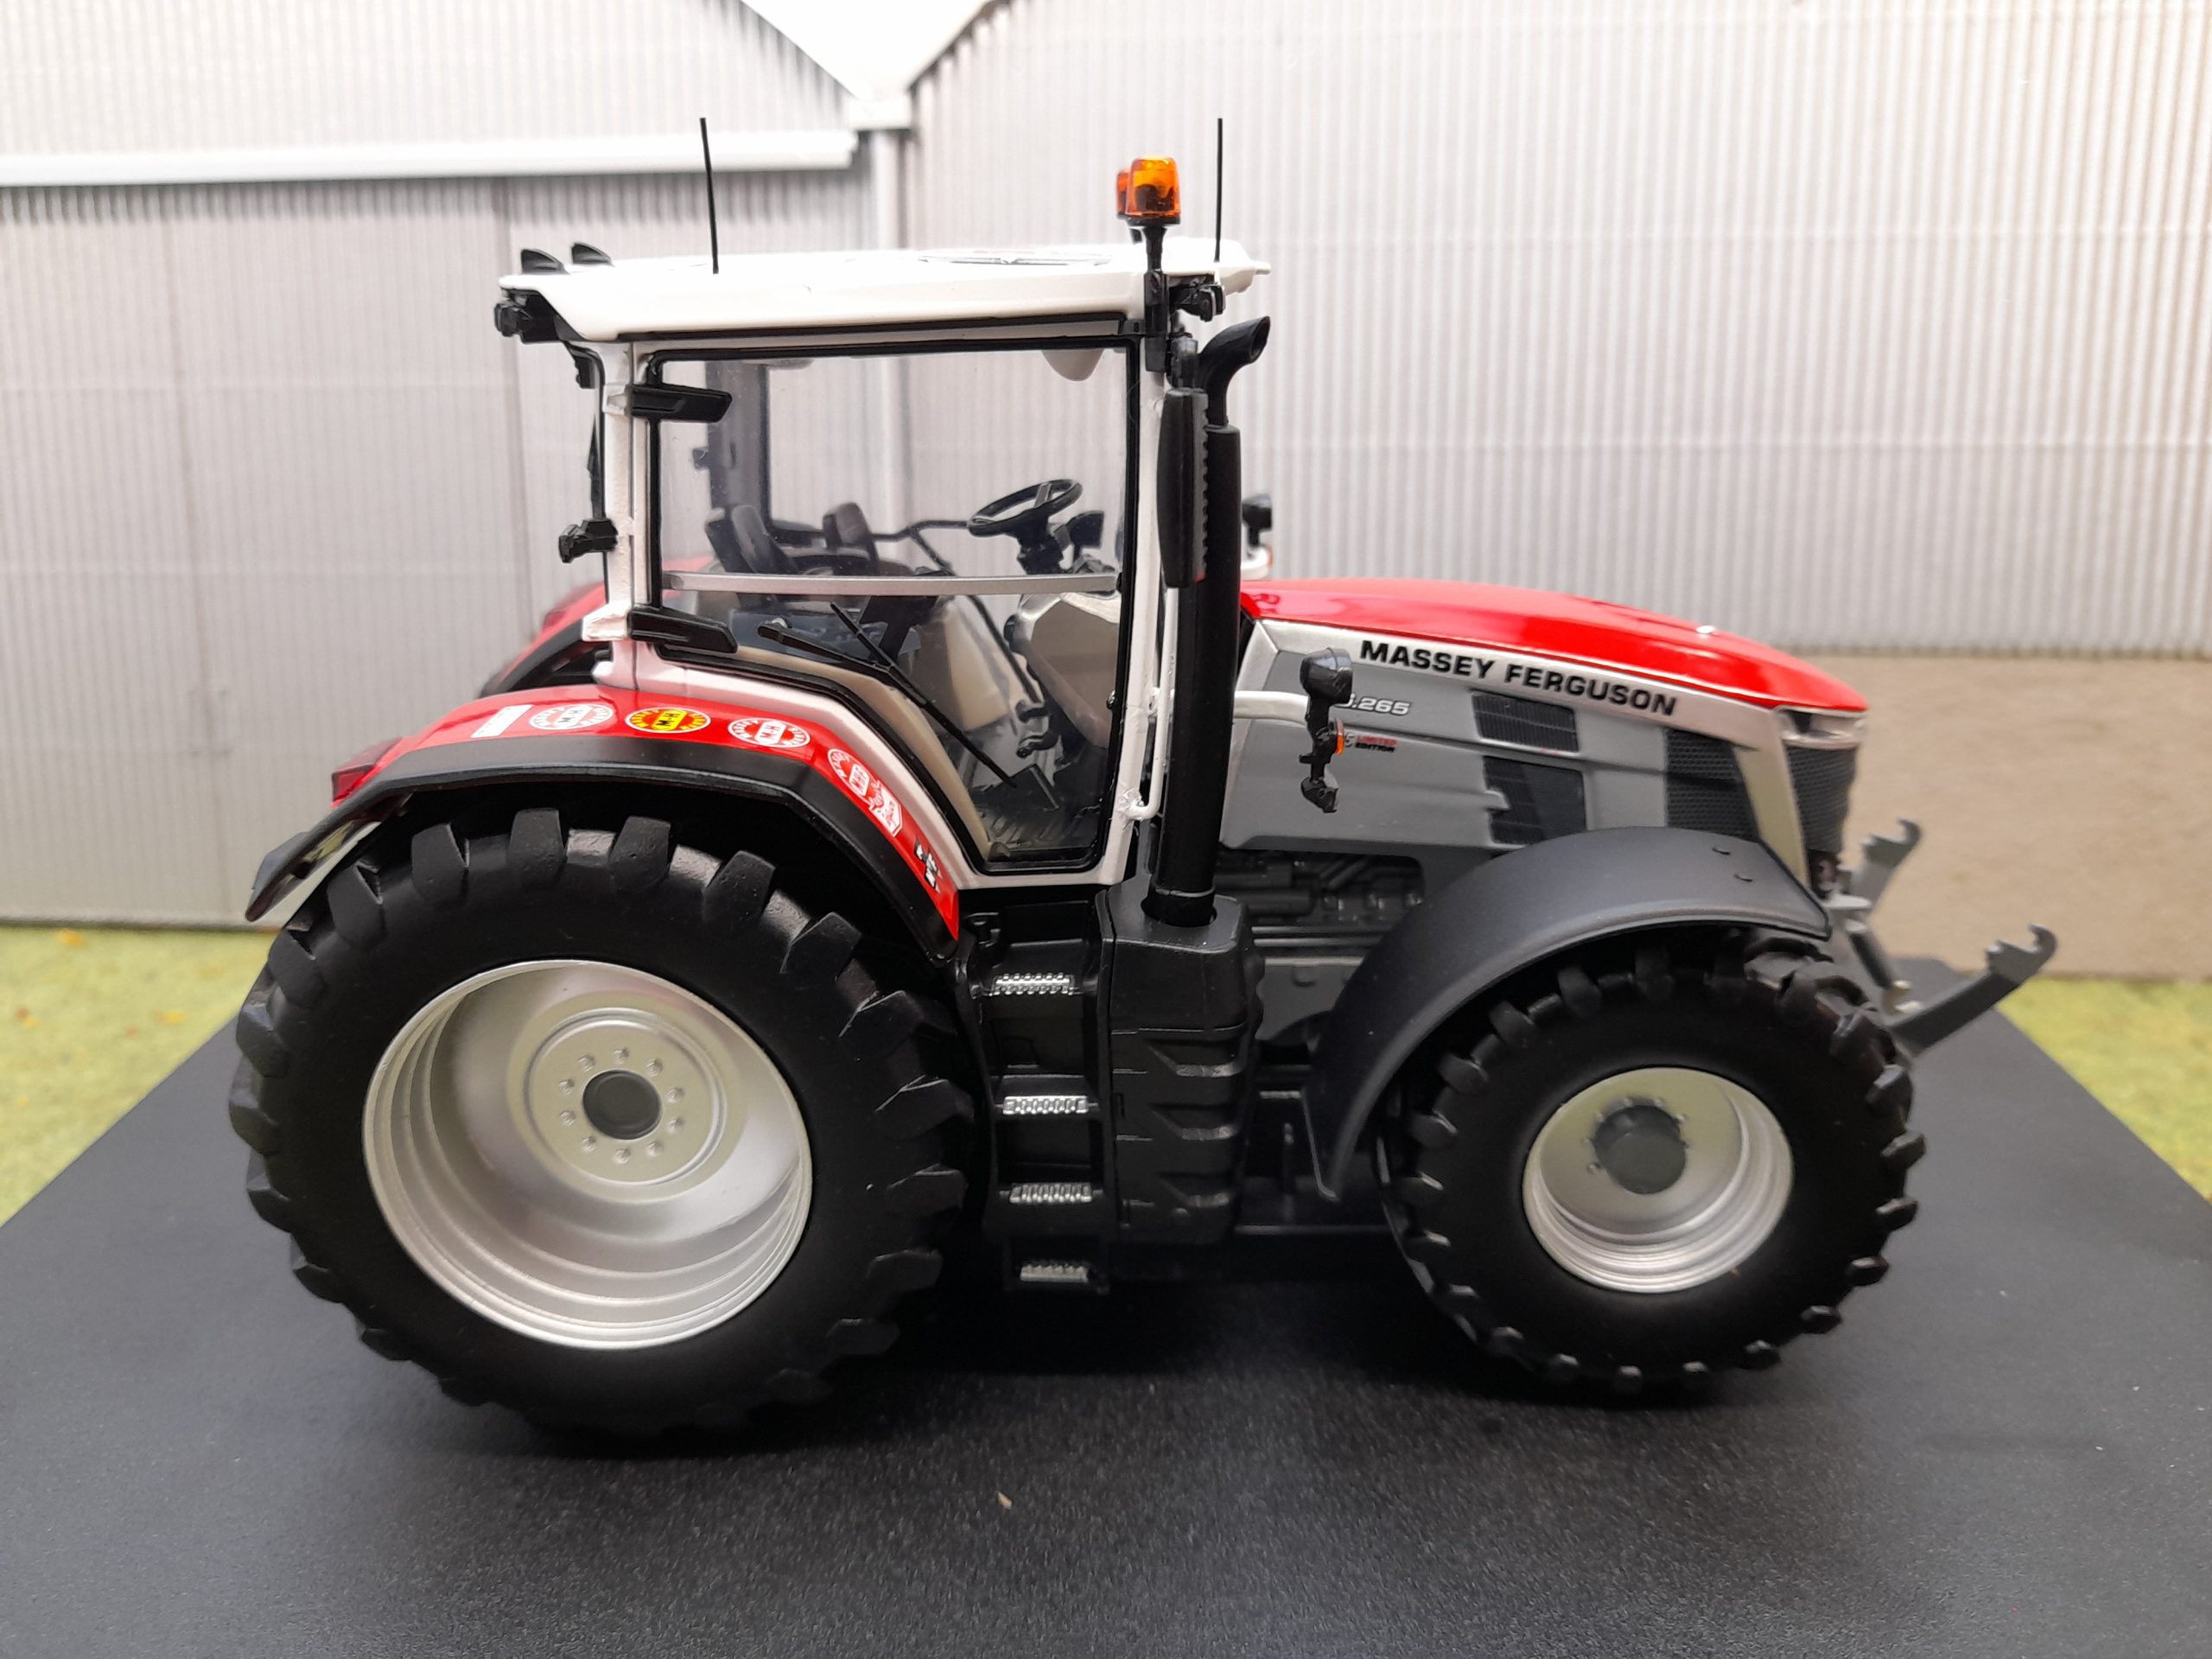 Massey Ferguson - The first units of the 175th anniversary Limited Edition  S Series tractors are about to leave the #MasseyFerguson factory, ready to  be put to work on farm in style!